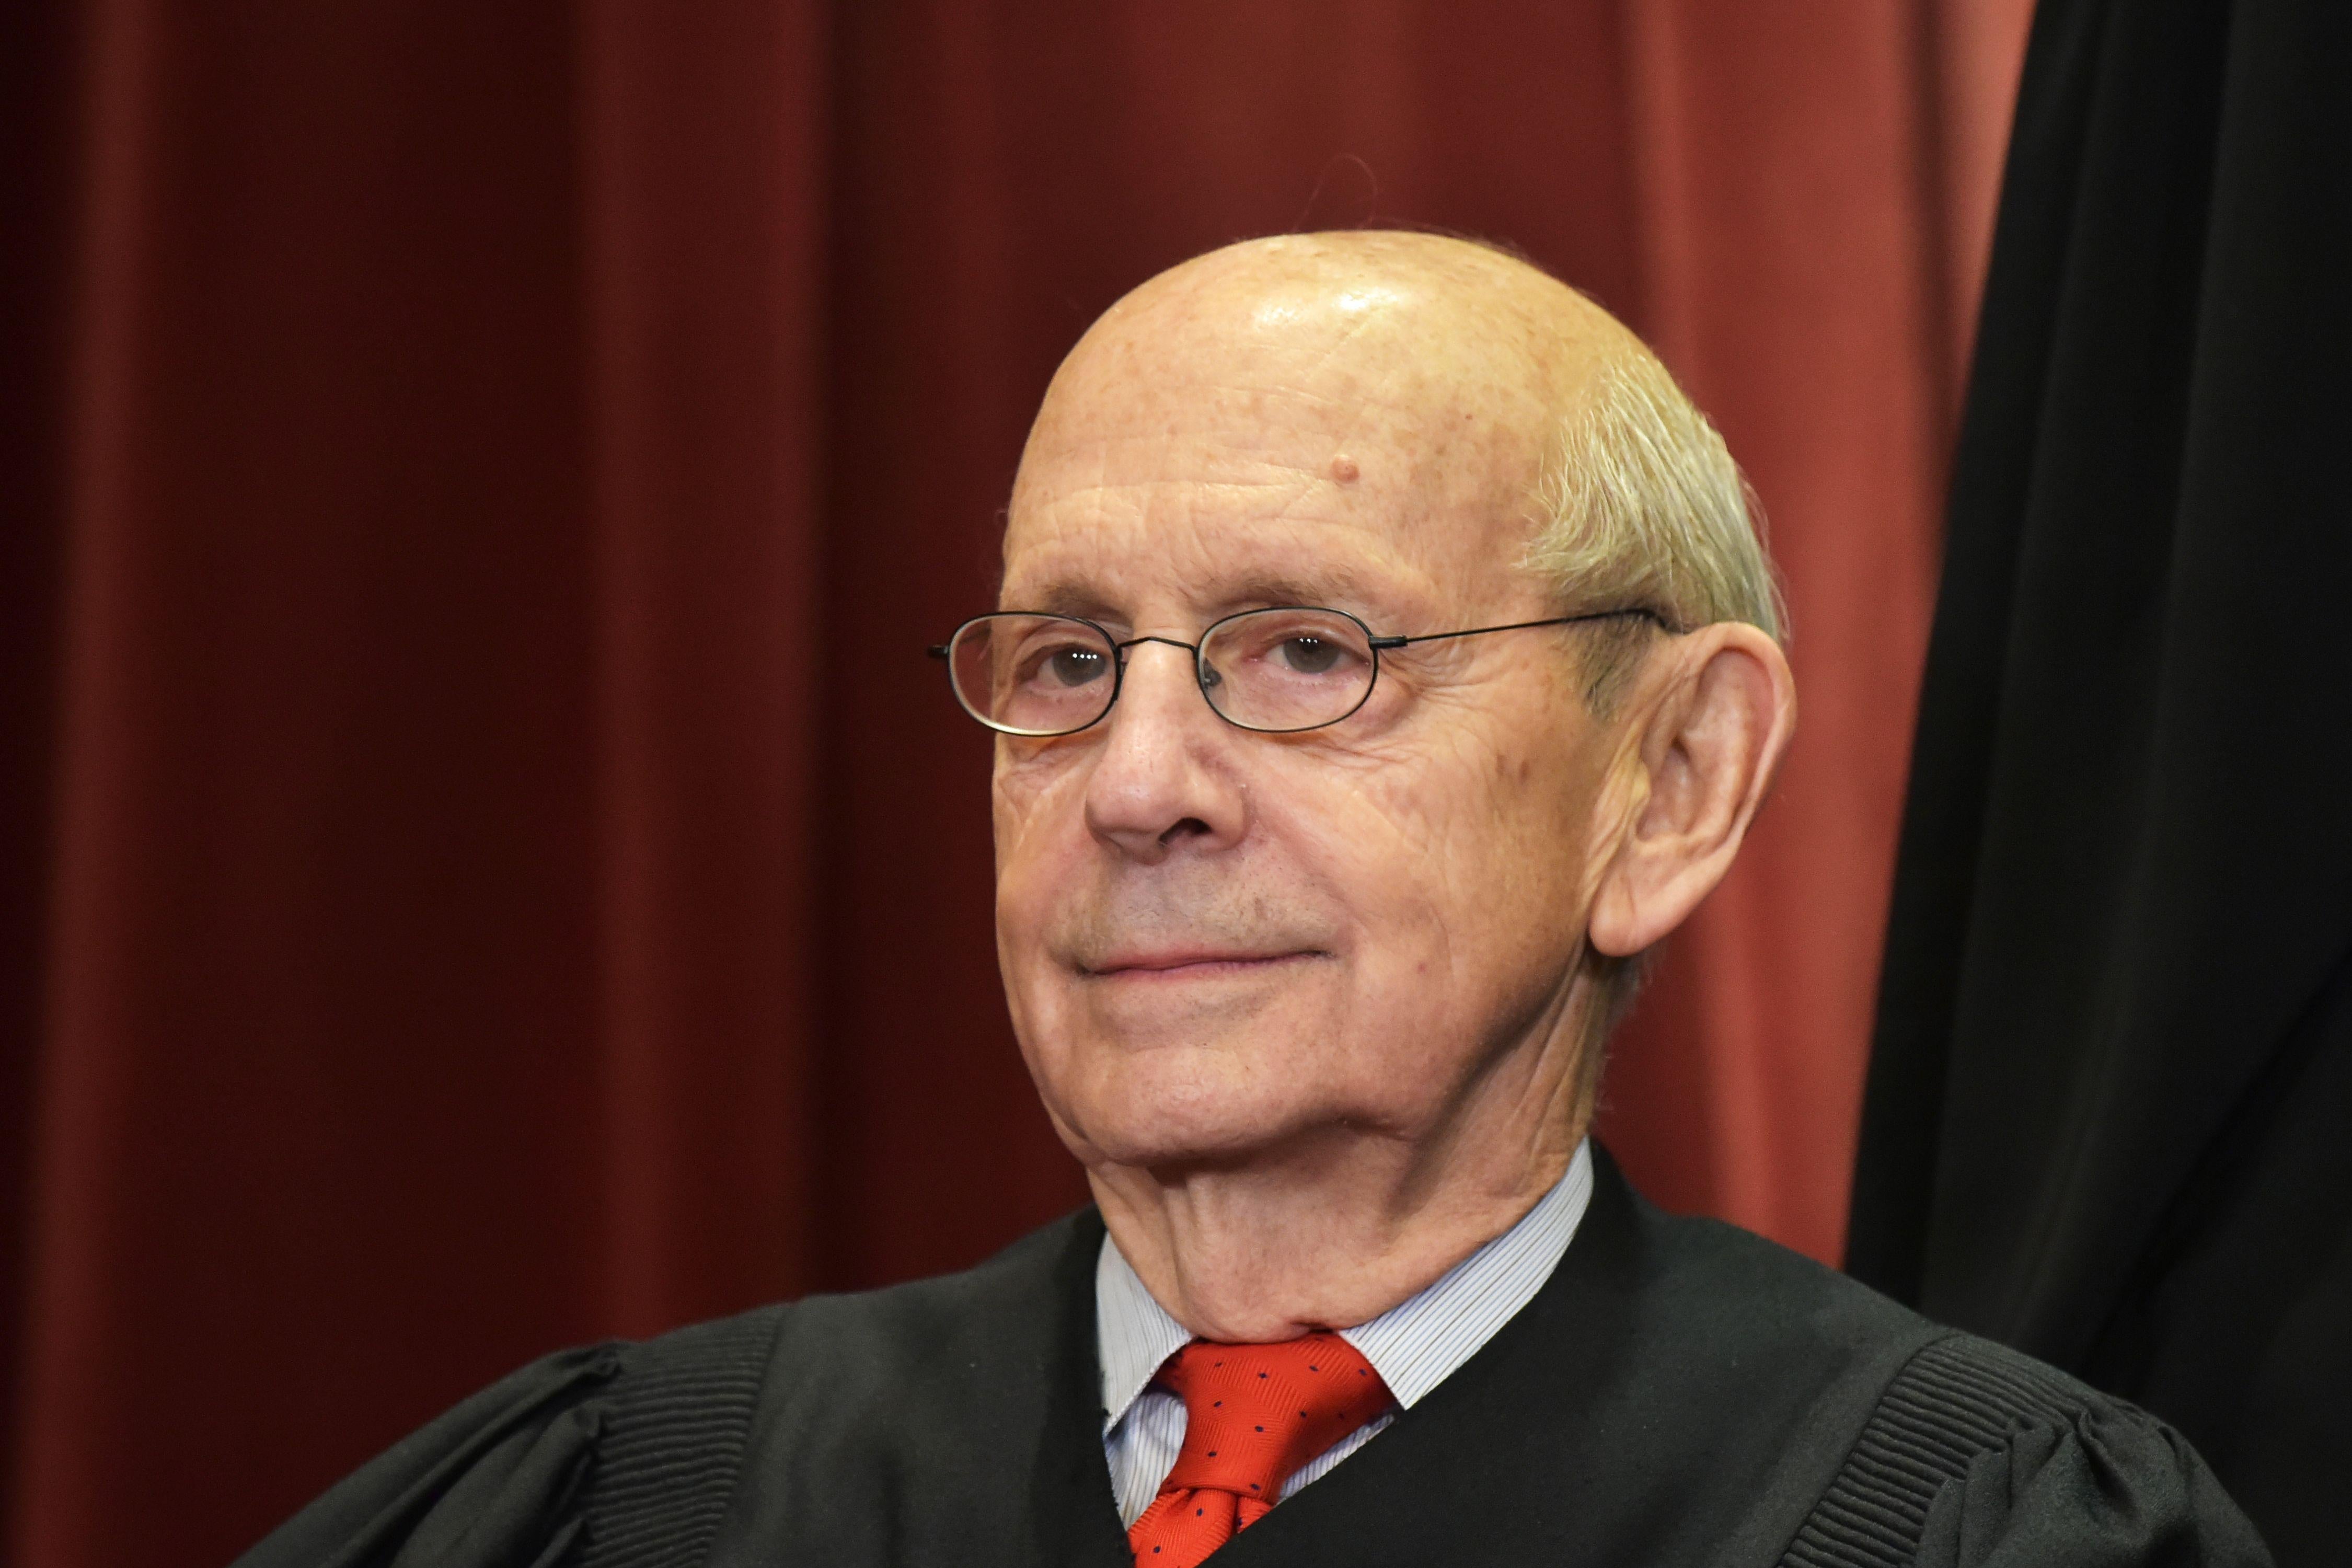 Stephen Breyer seated in a red tie and his Supreme Court justice robes